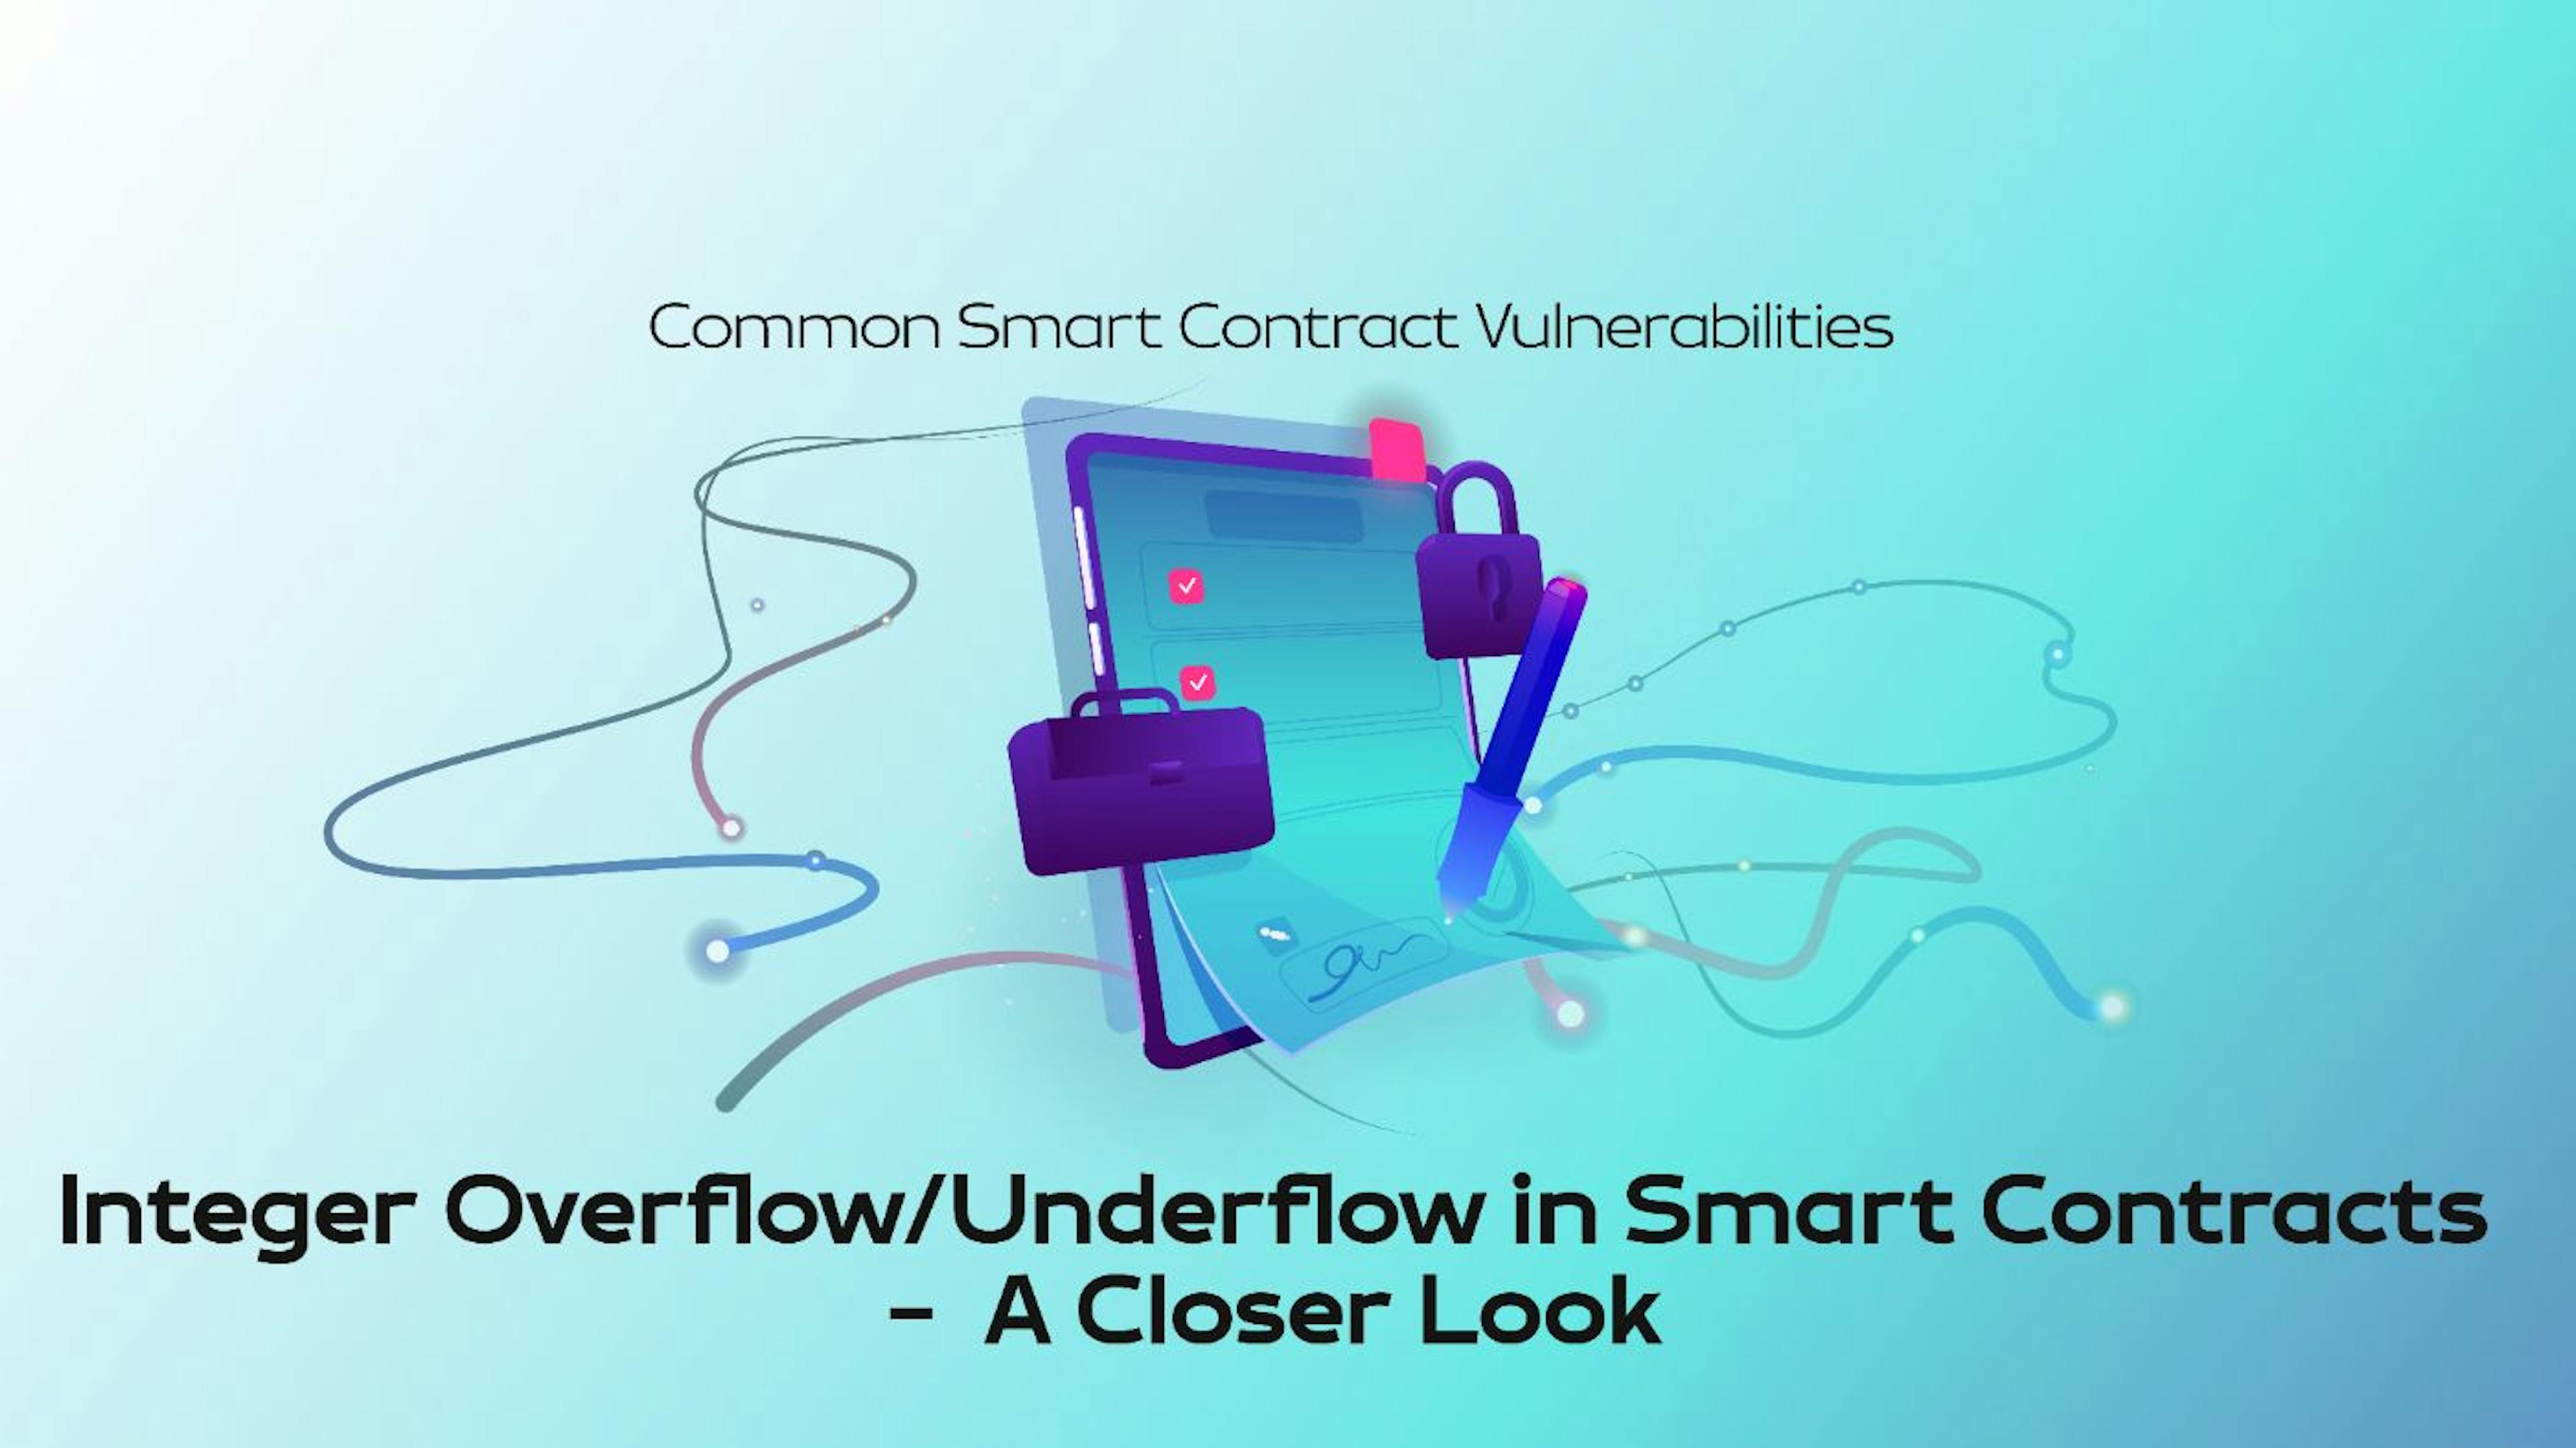 /solving-the-integer-overflowunderflow-vulnerability-in-smart-contracts feature image